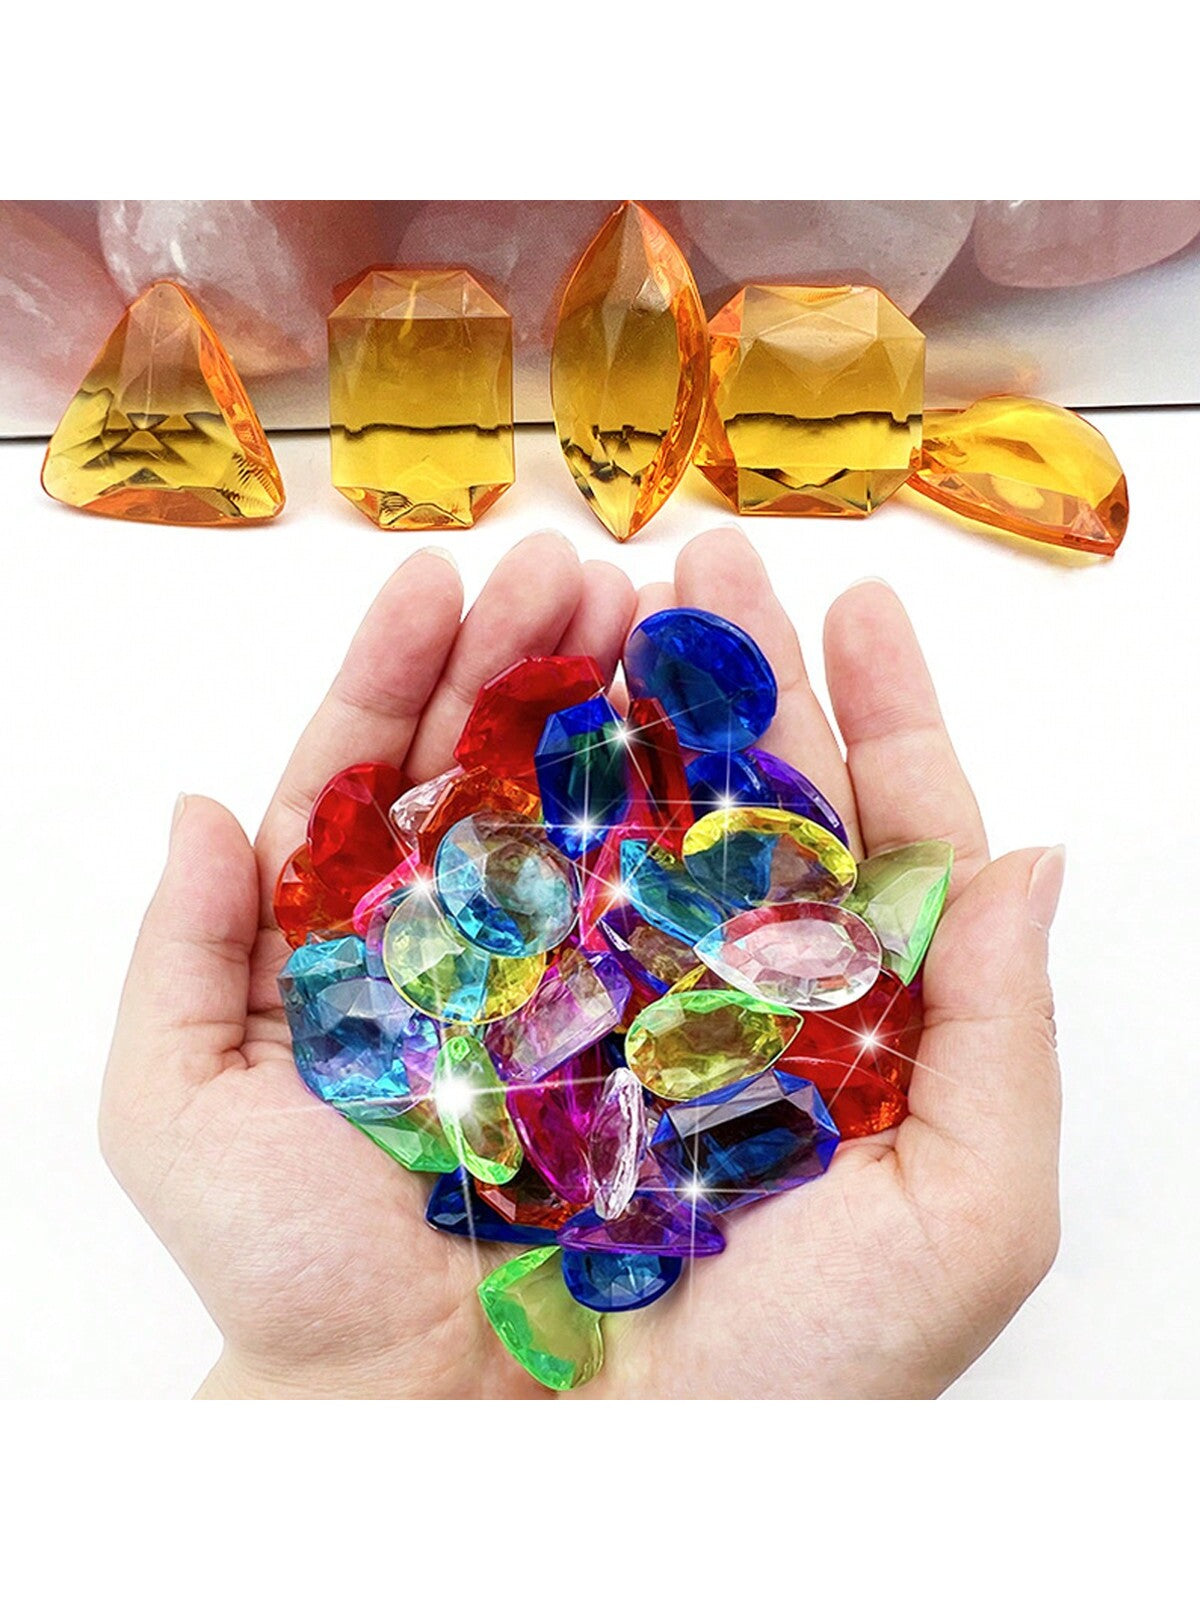 Acrylic Sparkling Gemstones 100 PC Set DIY Crafts or a Childs Toy in Finding a Treasure! 💜